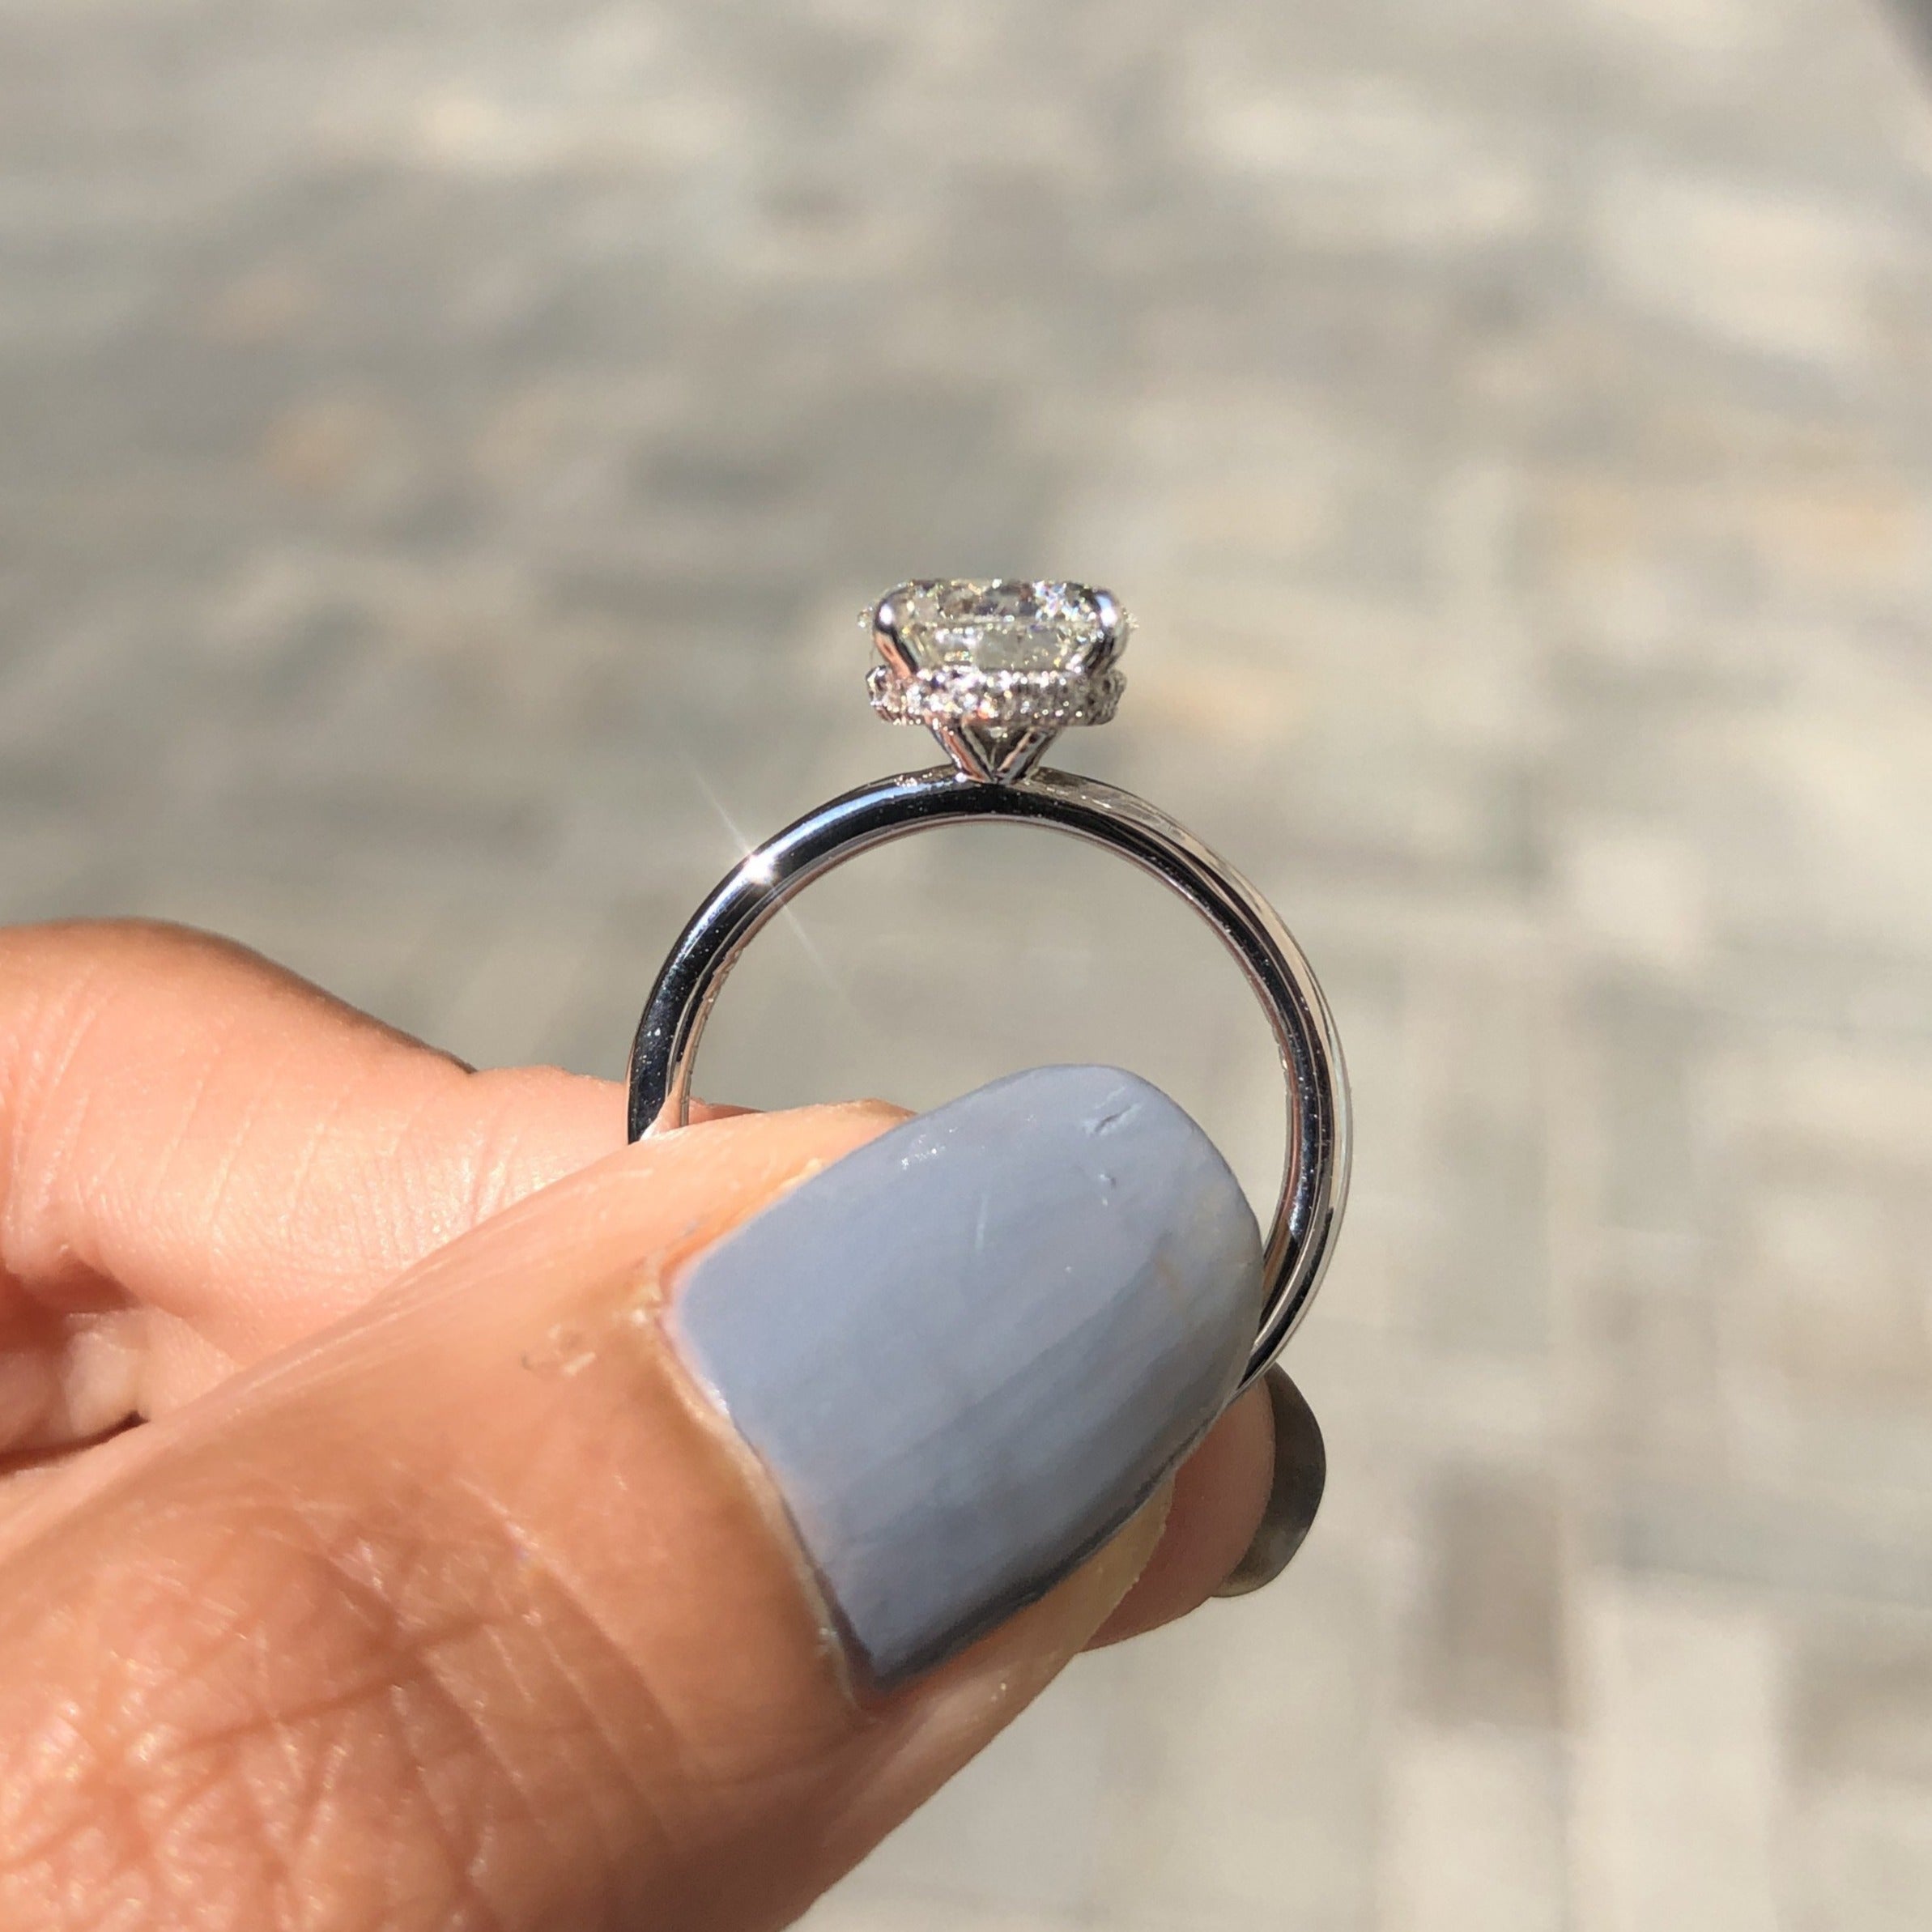 TRADITIONAL SOLITAIRE WITH A HIDDEN HALO